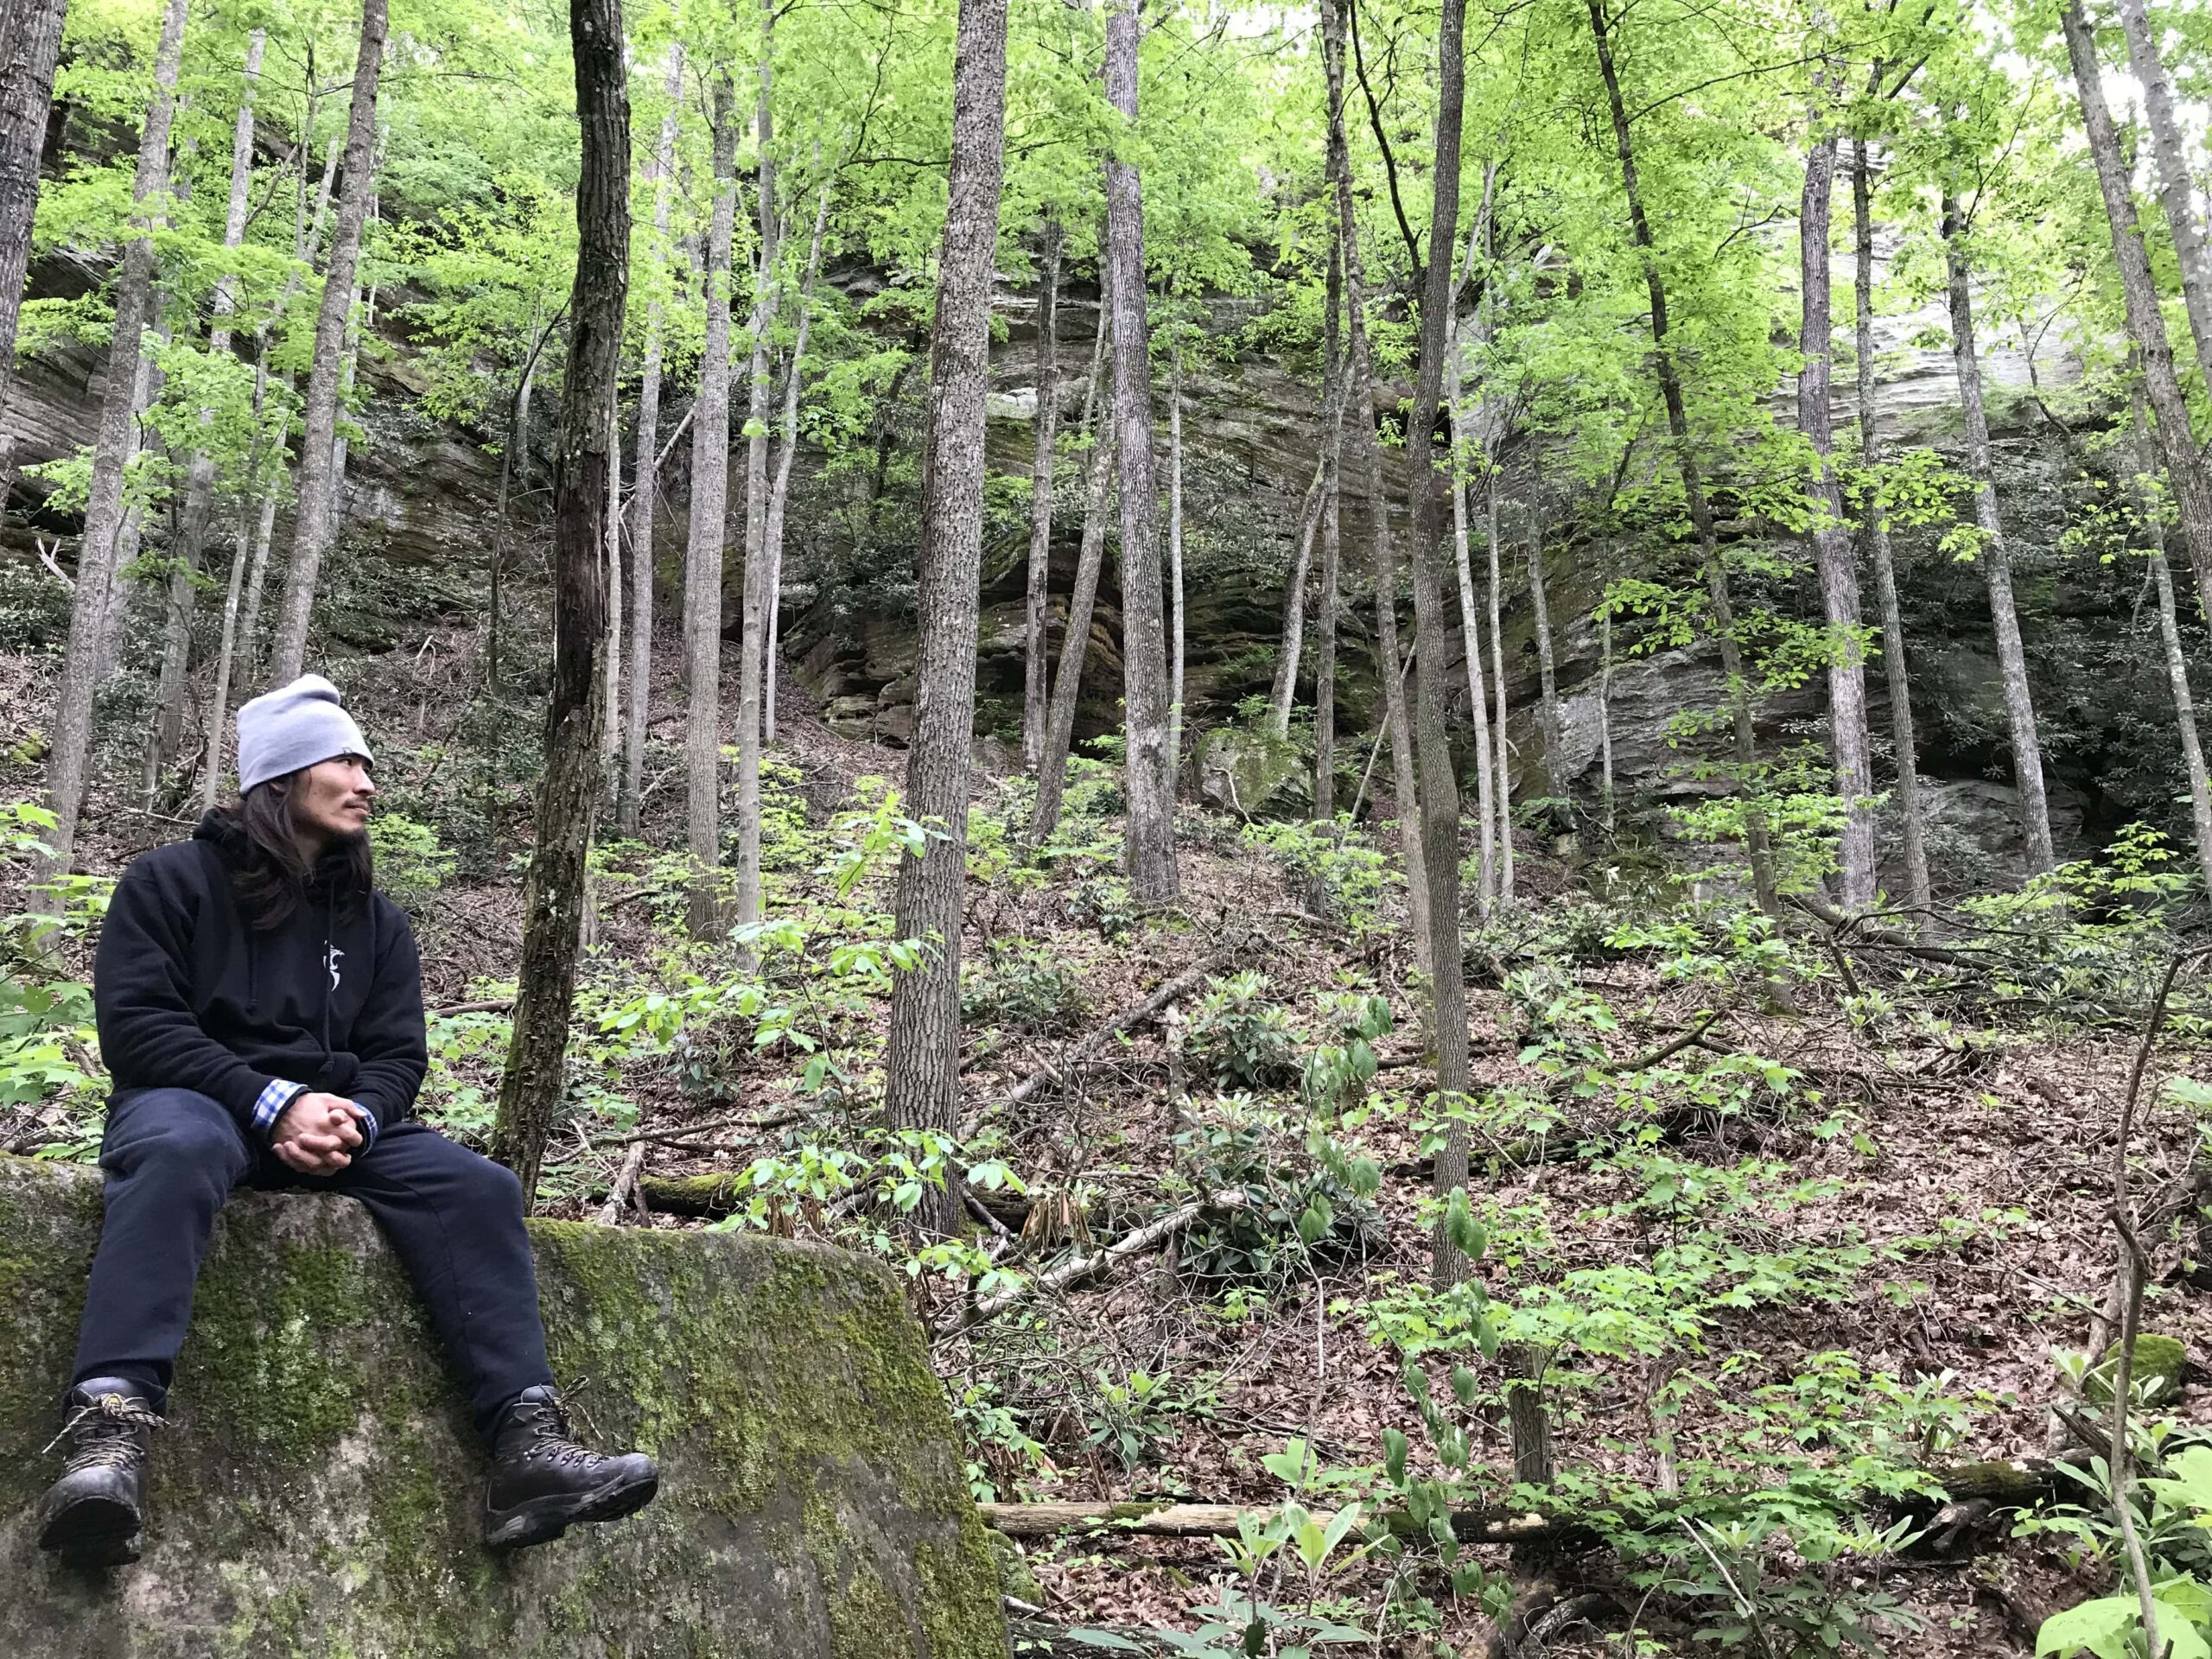 Sebastian sitting on a rock at Red River Gorge in Kentucky. He wears a grey beanie, a black hoodie, and brown hiking boots. The backdrop is a gently sloping hill filled with tall, lushly green trees. Delicate foliage, peppering the ground, rise up above the wooded, leafy ground into a textured rock face.